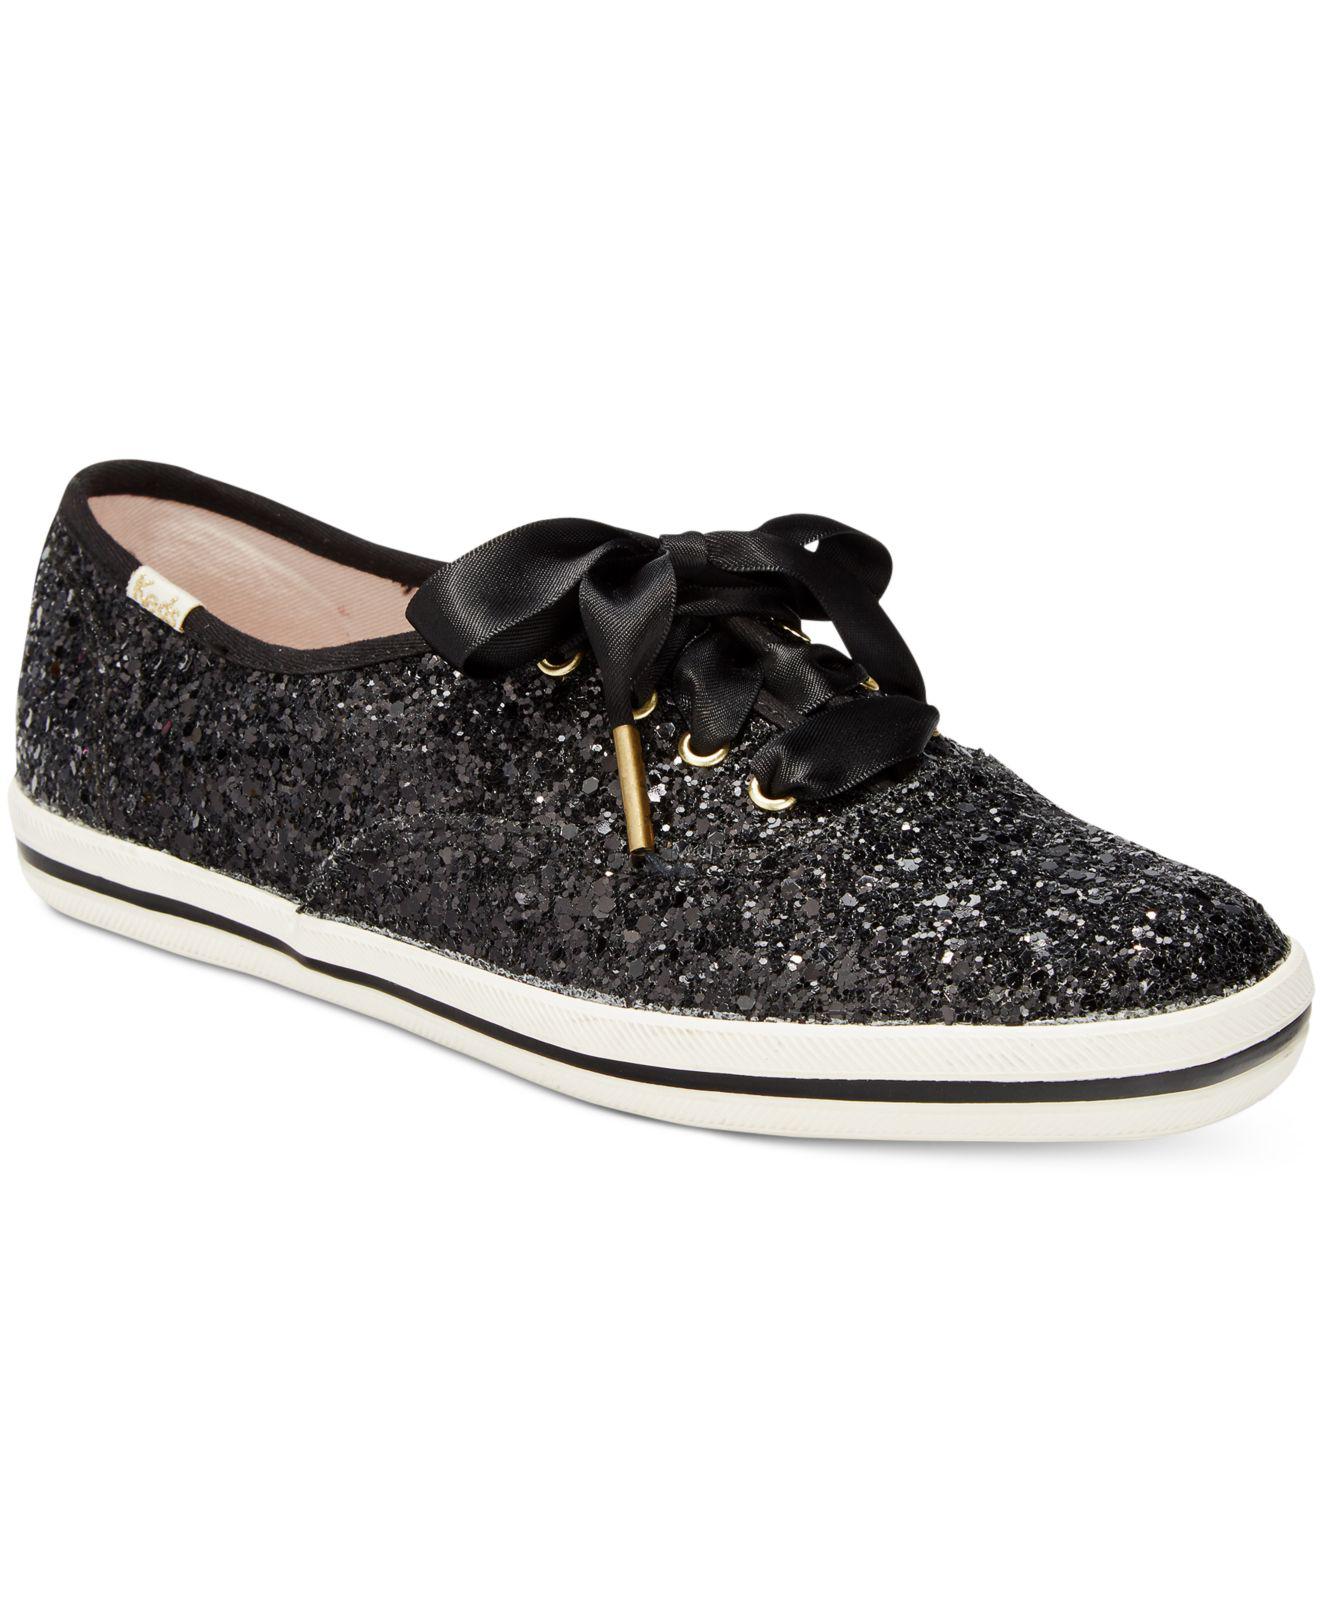 Kate Spade Satin Glitter Lace-up Sneakers in Black - Save 12% - Lyst